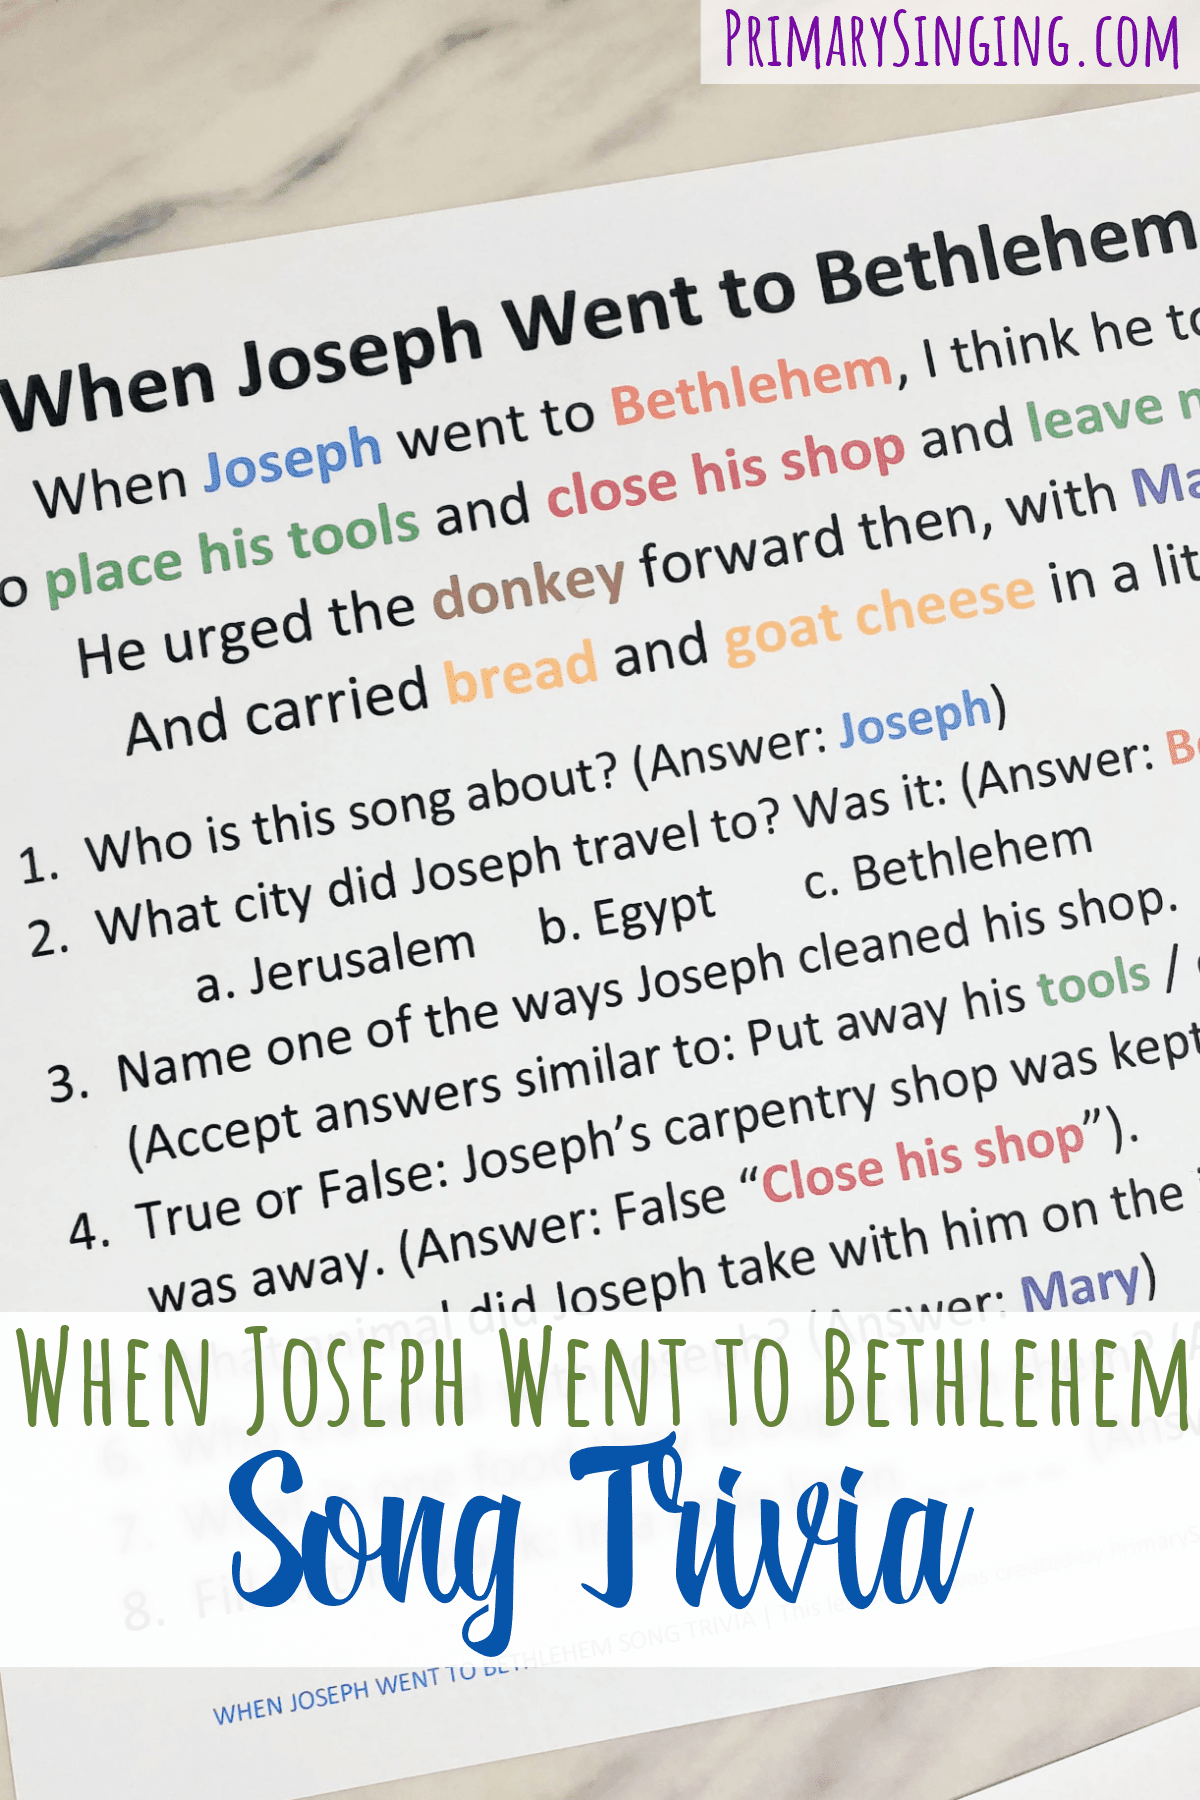 When Joseph Went to Bethlehem Song Trivia singing time activity! Use the lyrics of this Primary Christmas song to answer simple trivia questions. Pit the kids vs the teachers for a fun challenge with the words. Includes free printable song helps for LDS Primary music leaders.